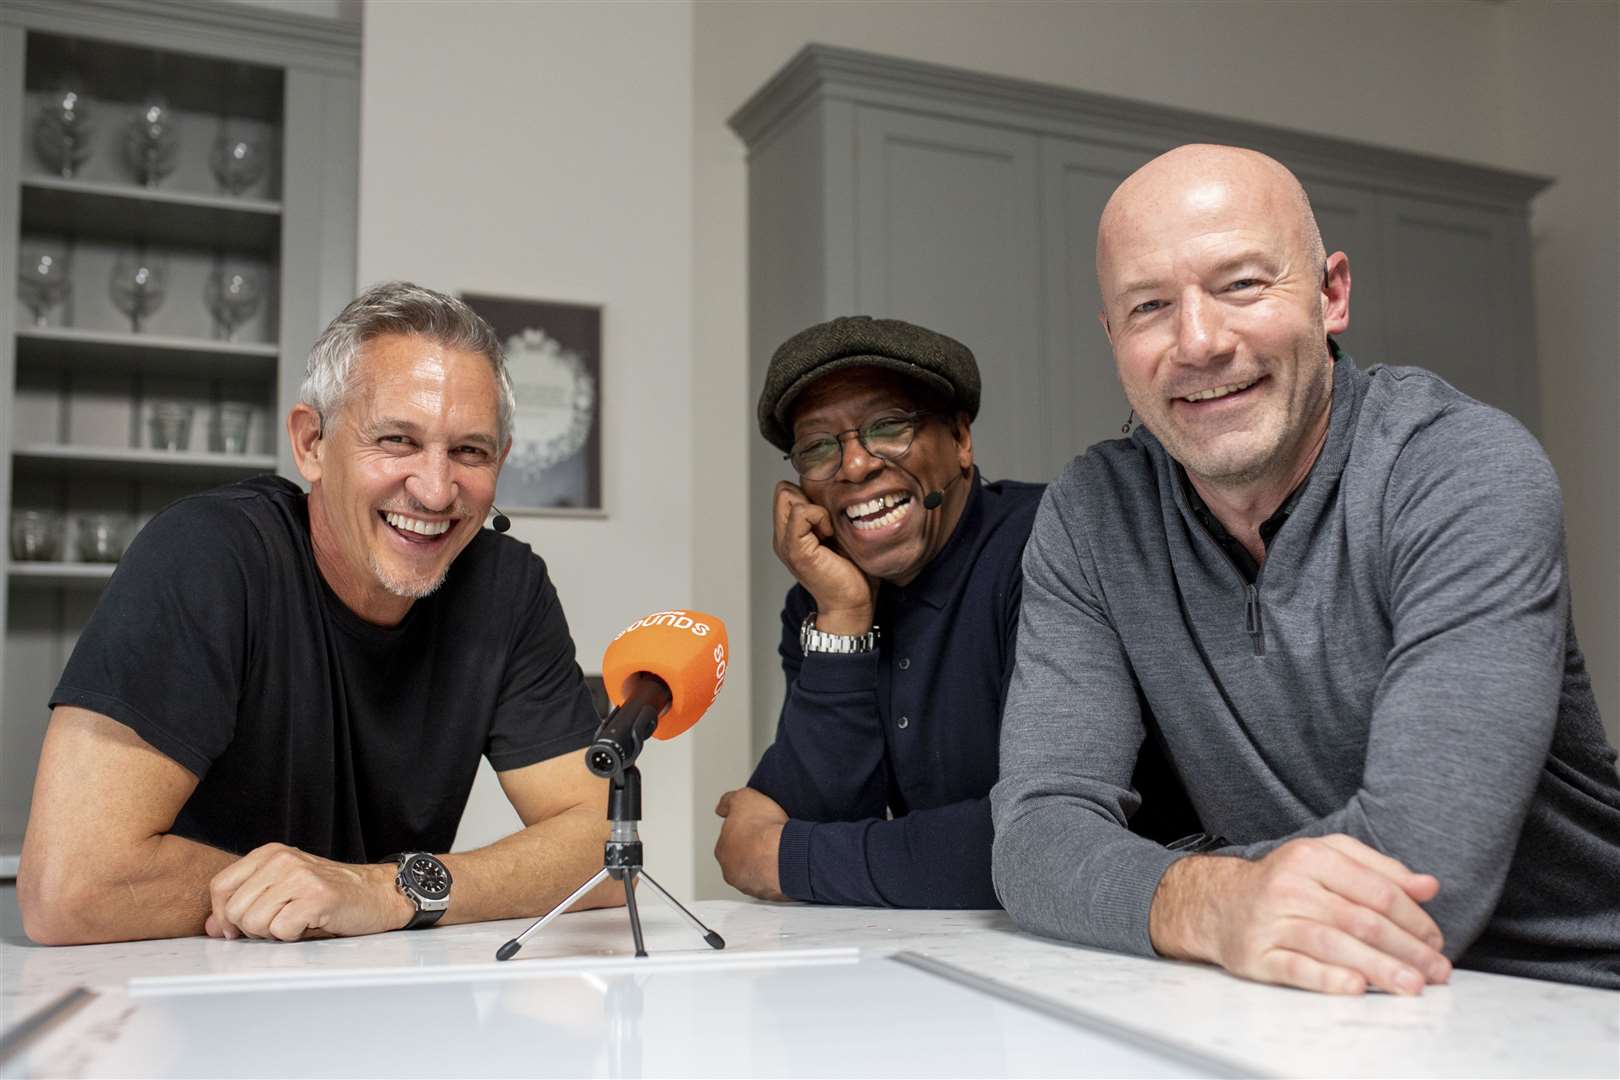 Gary Lineker with his Match of the Day cohorts Alan Shearer and Ian Wright.